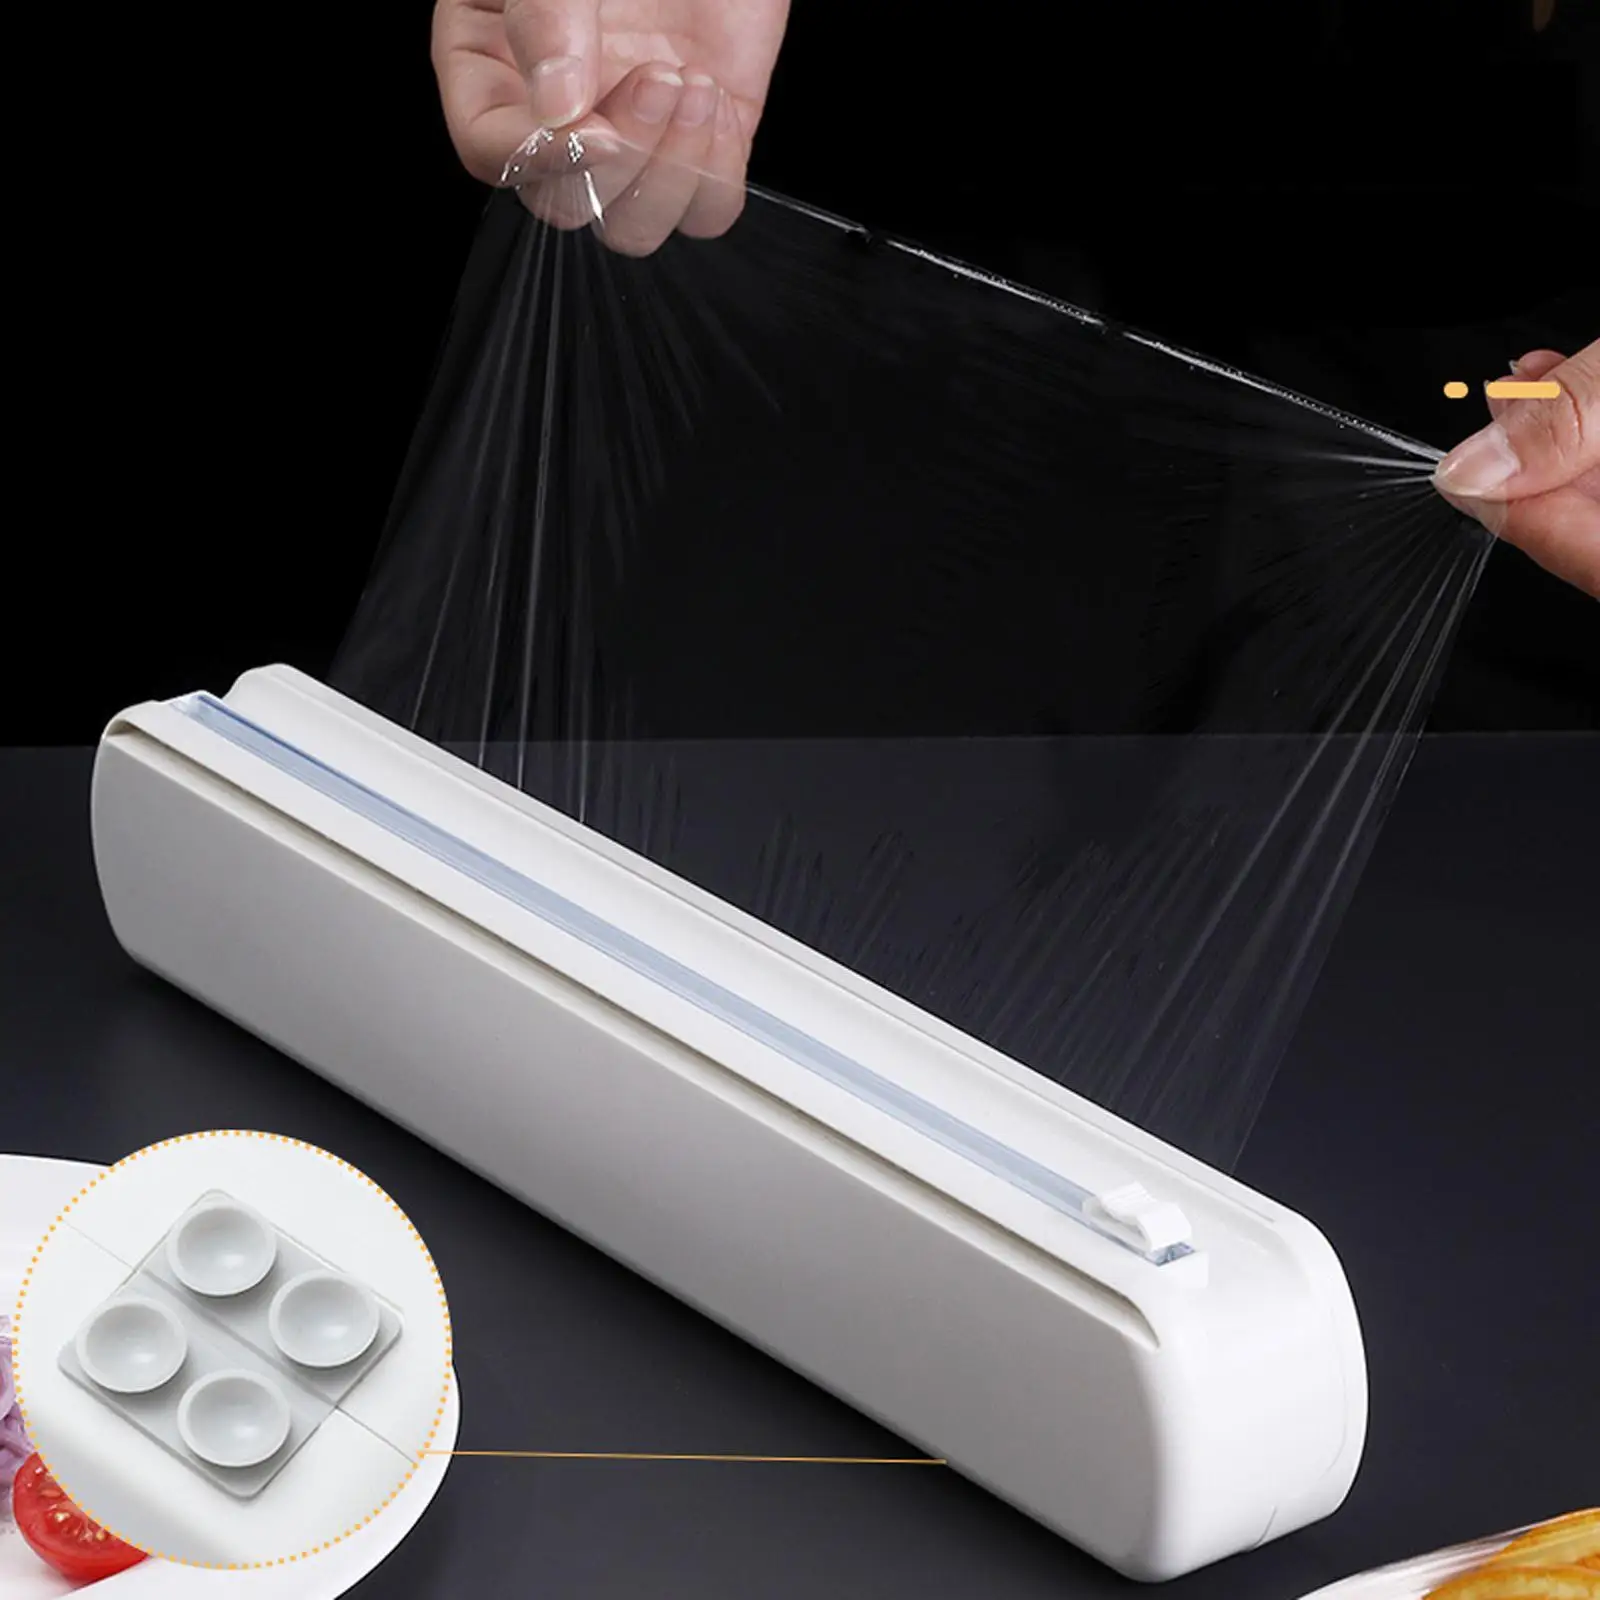 Household Cling Film Cutting Box Smoothly Cutting Foil Cling Film Storage Holder f/ Cafe